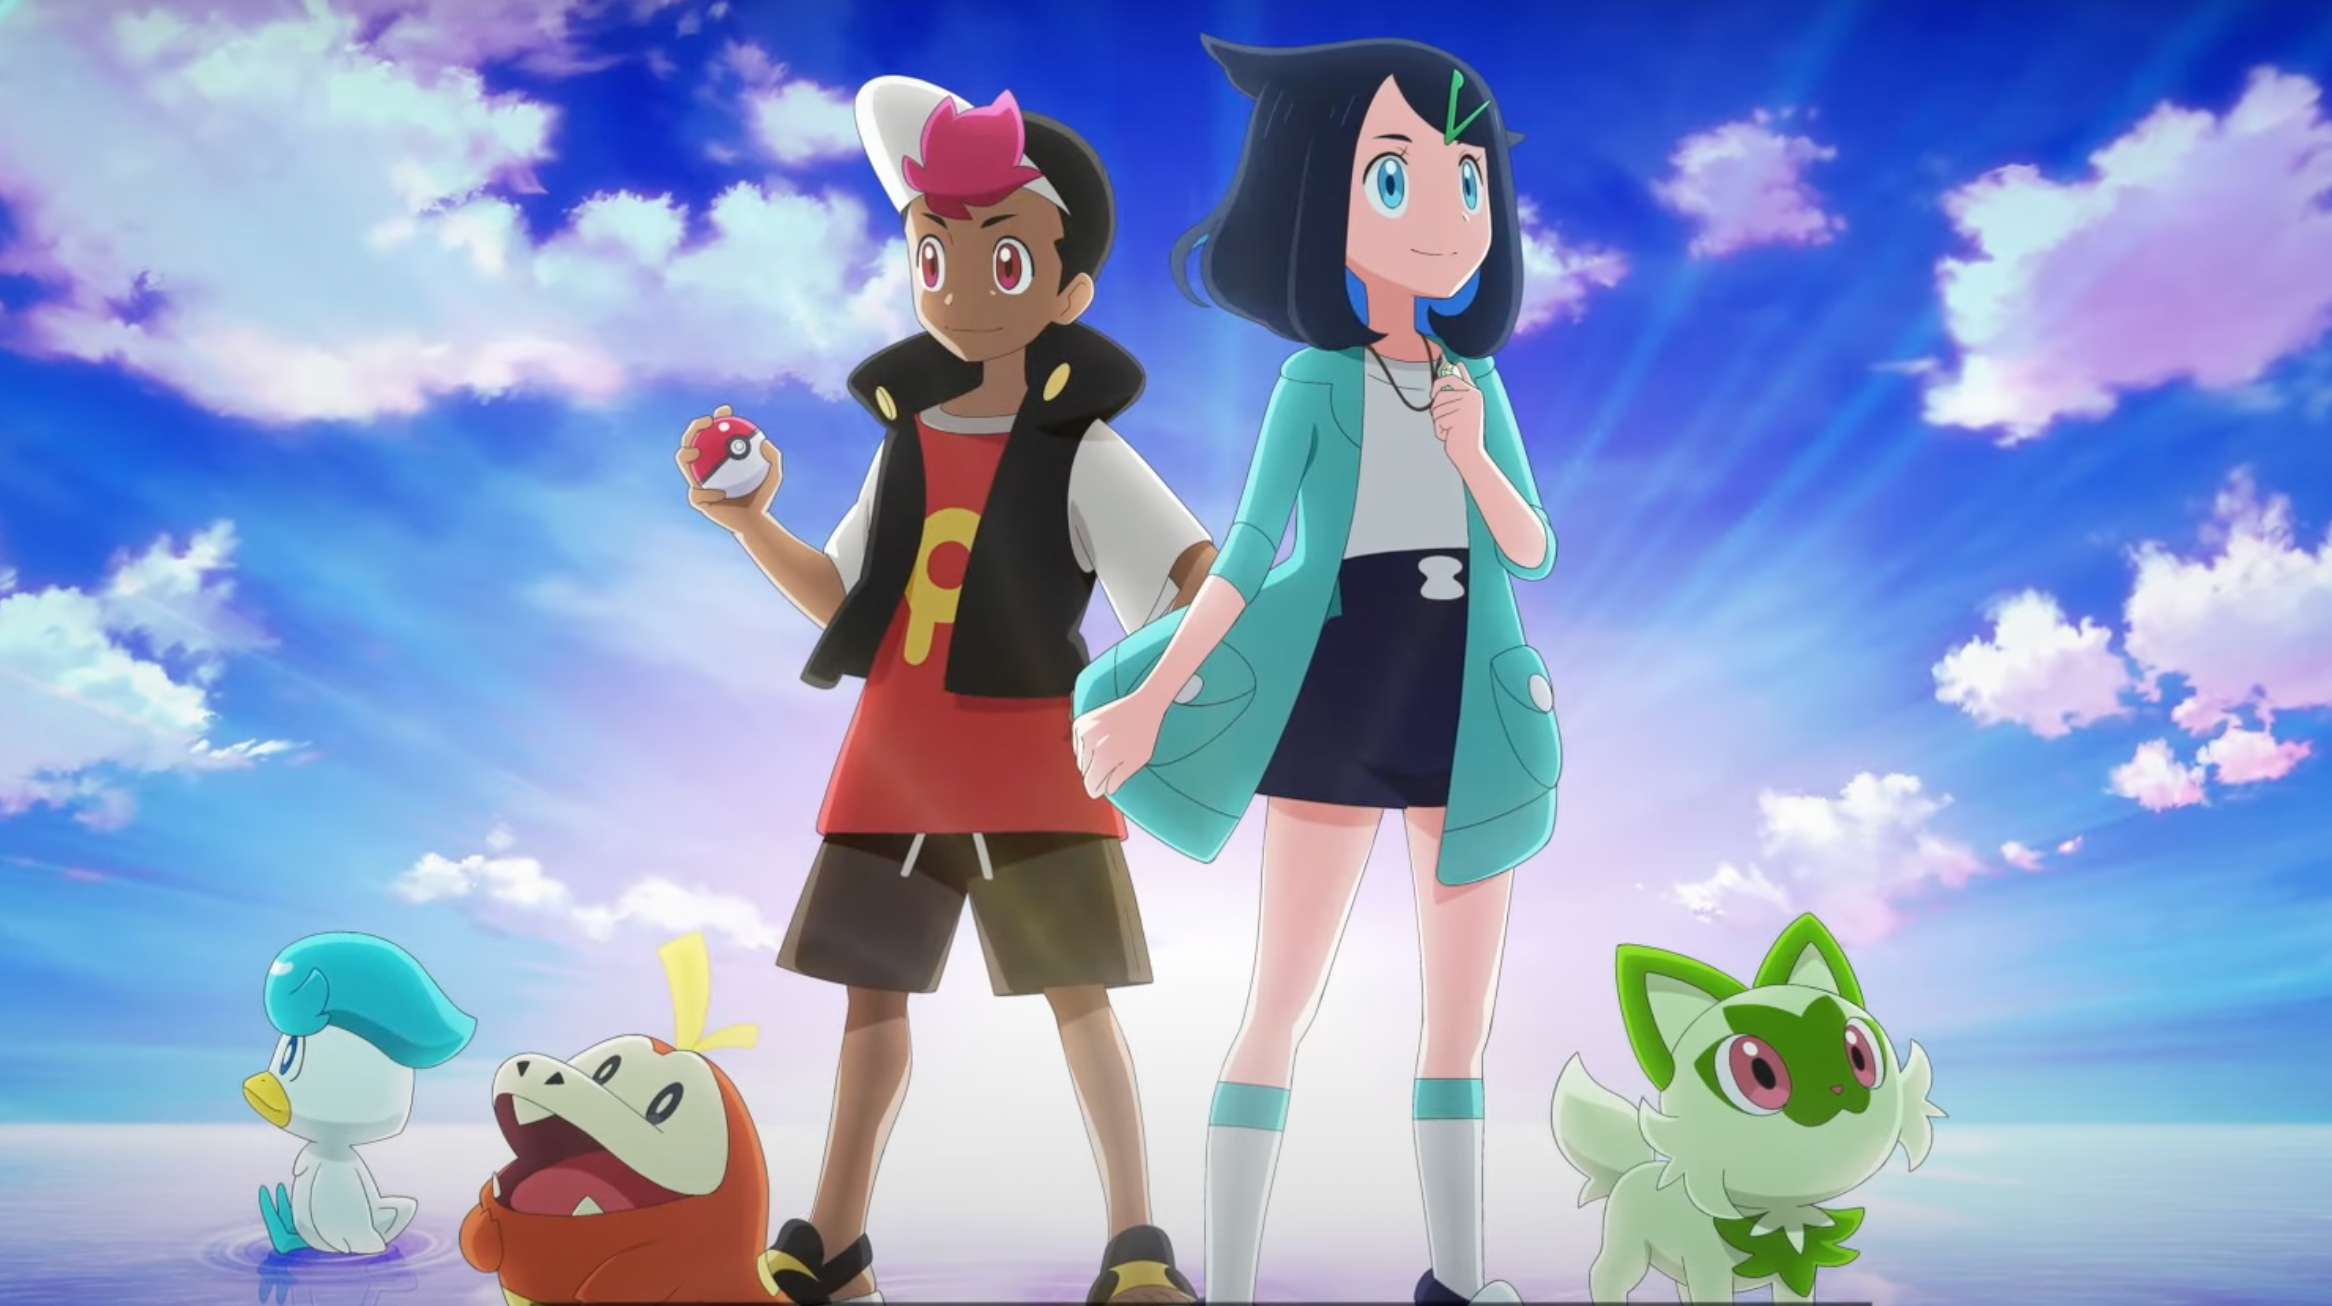 Check out this teaser for the upcoming animated Pokémon series